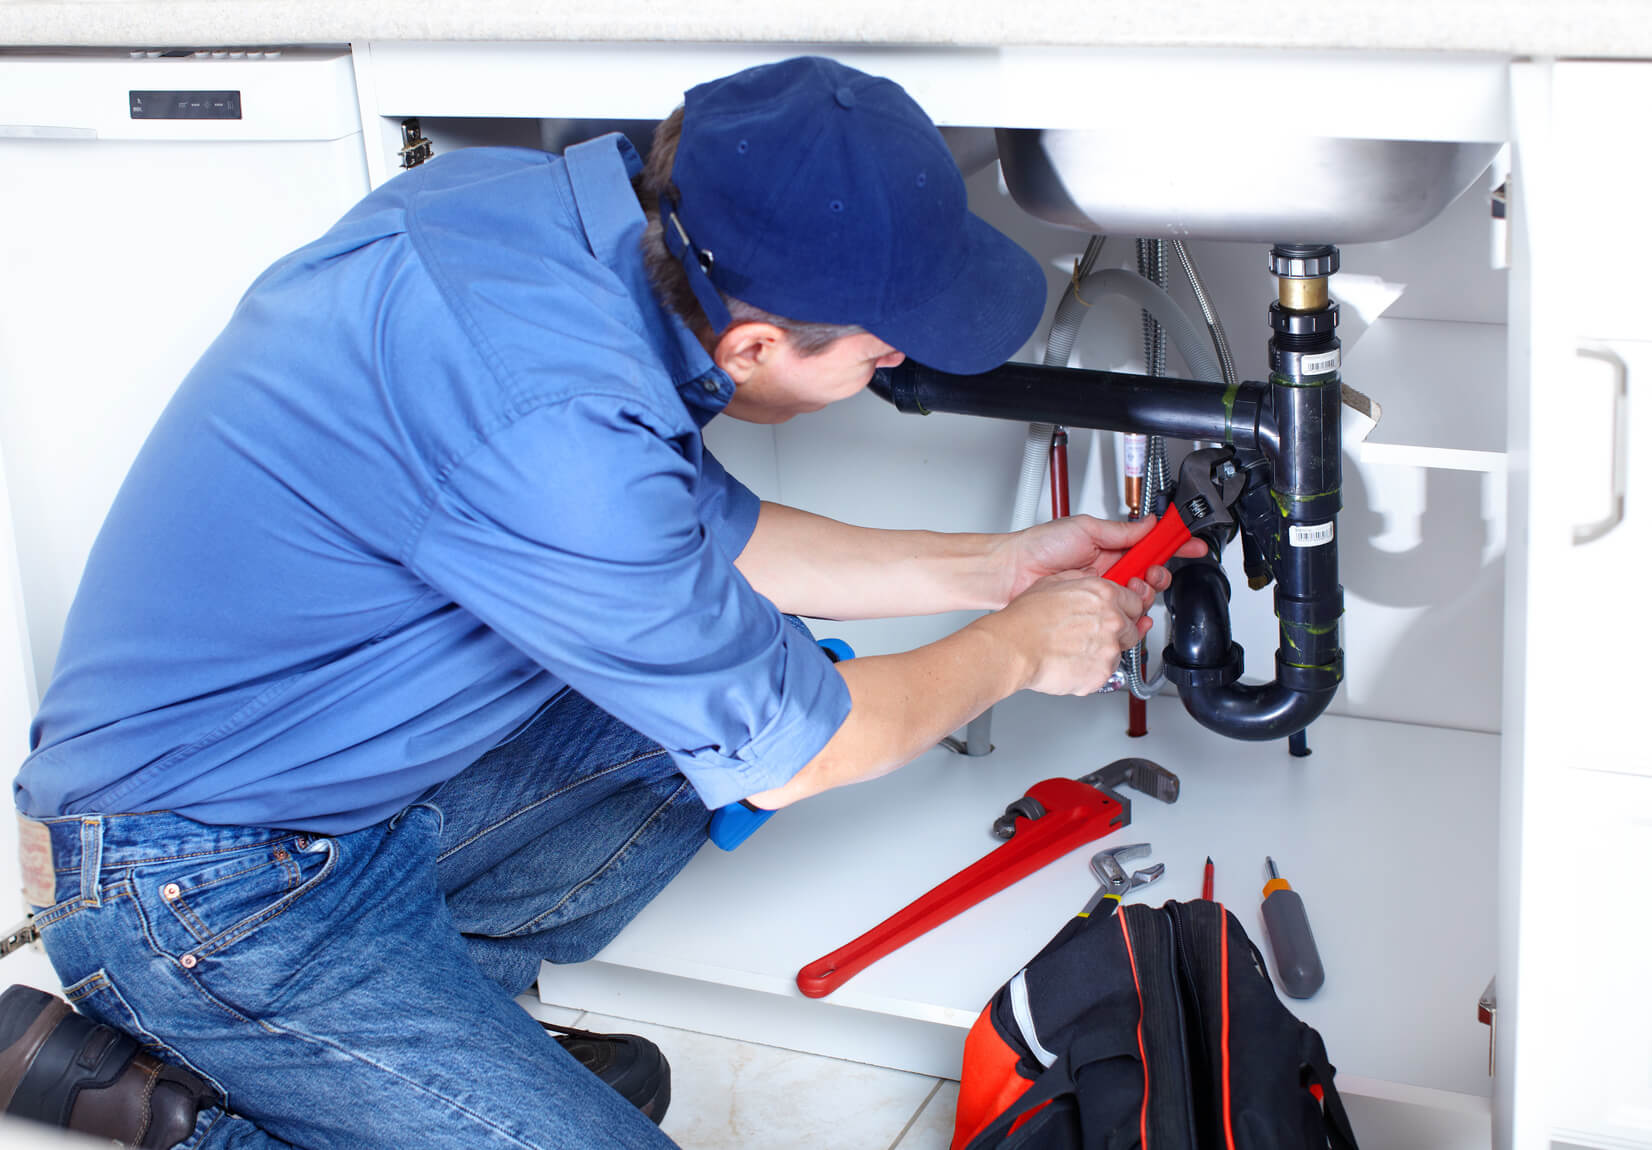 Plumbing Industry Trends All Professionals Should Know